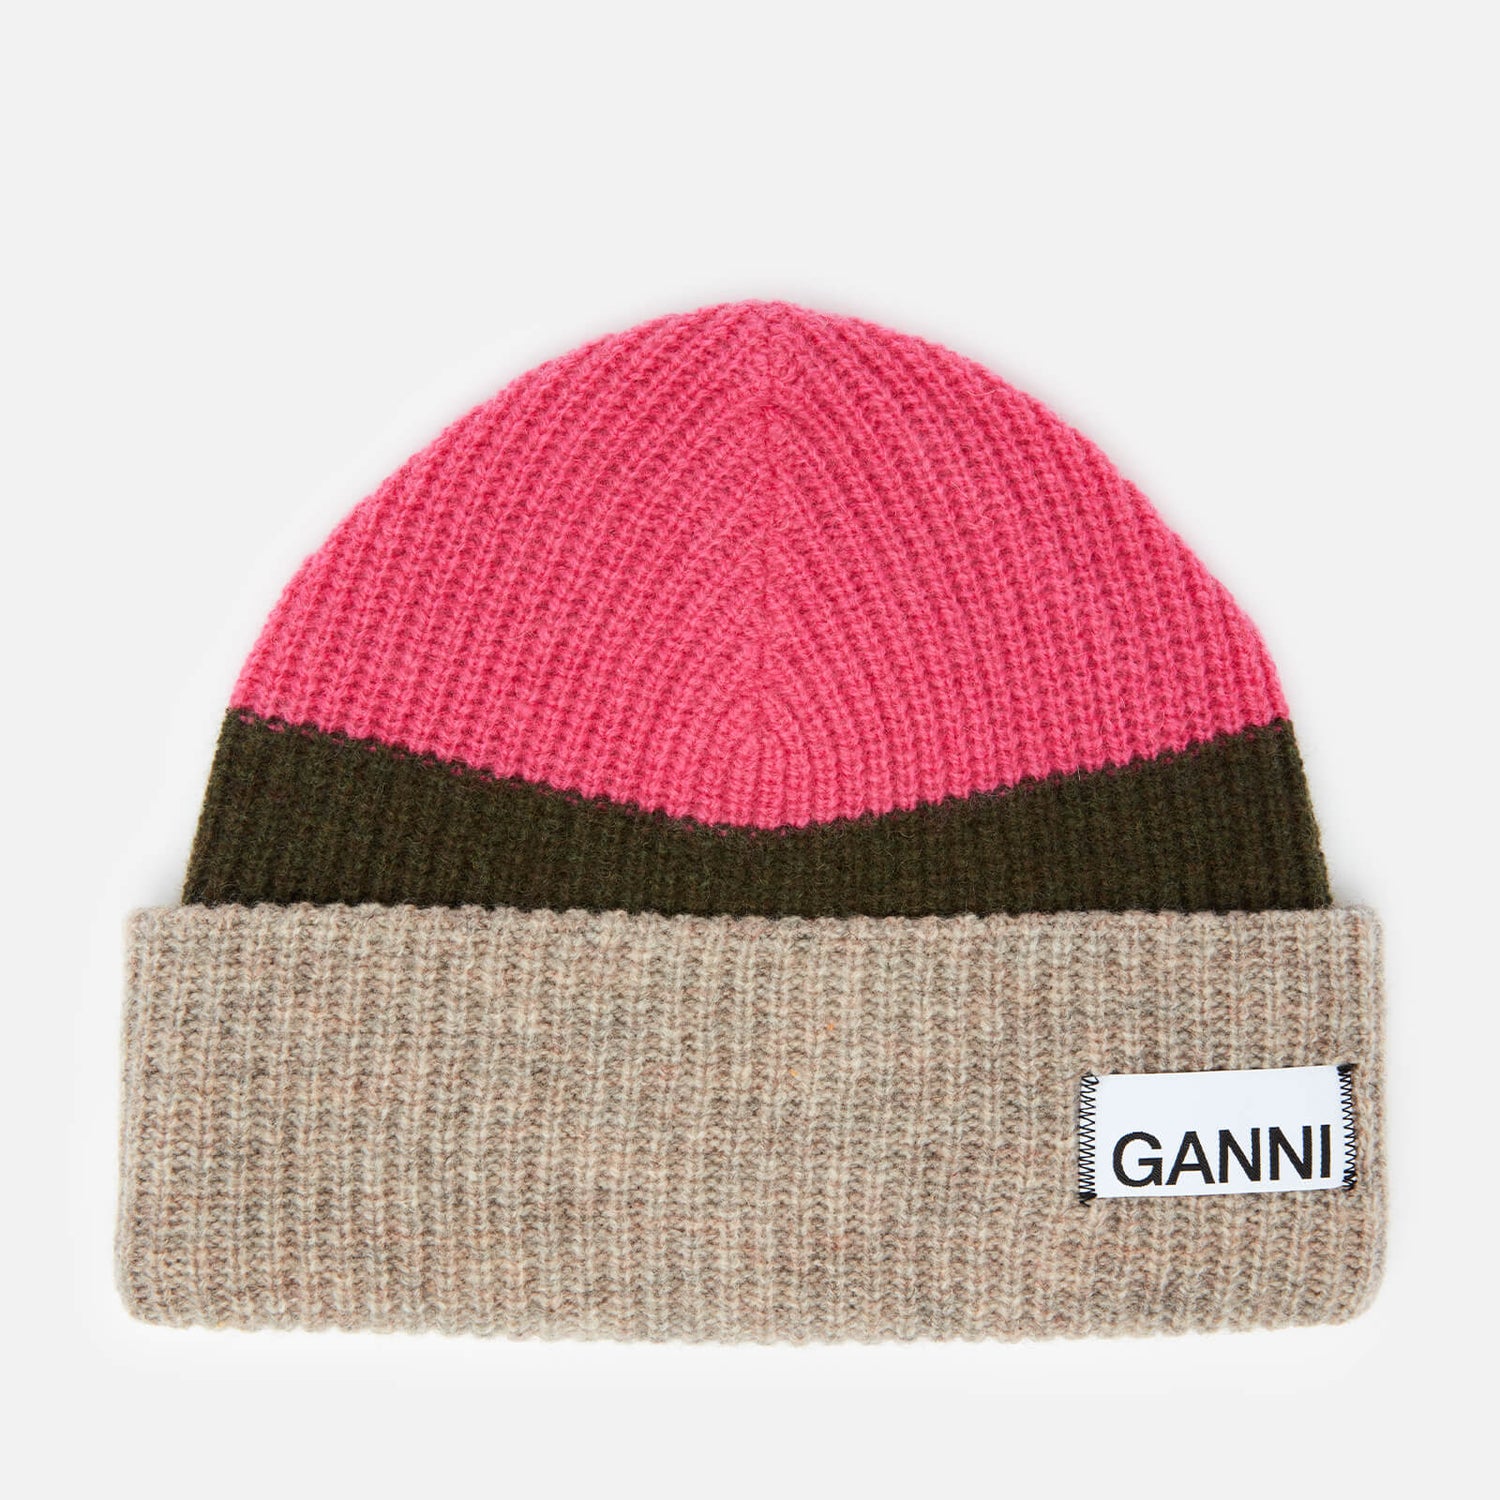 Ganni Women's Knitted Colour Block Beanie - Hot Pink - Free UK Delivery